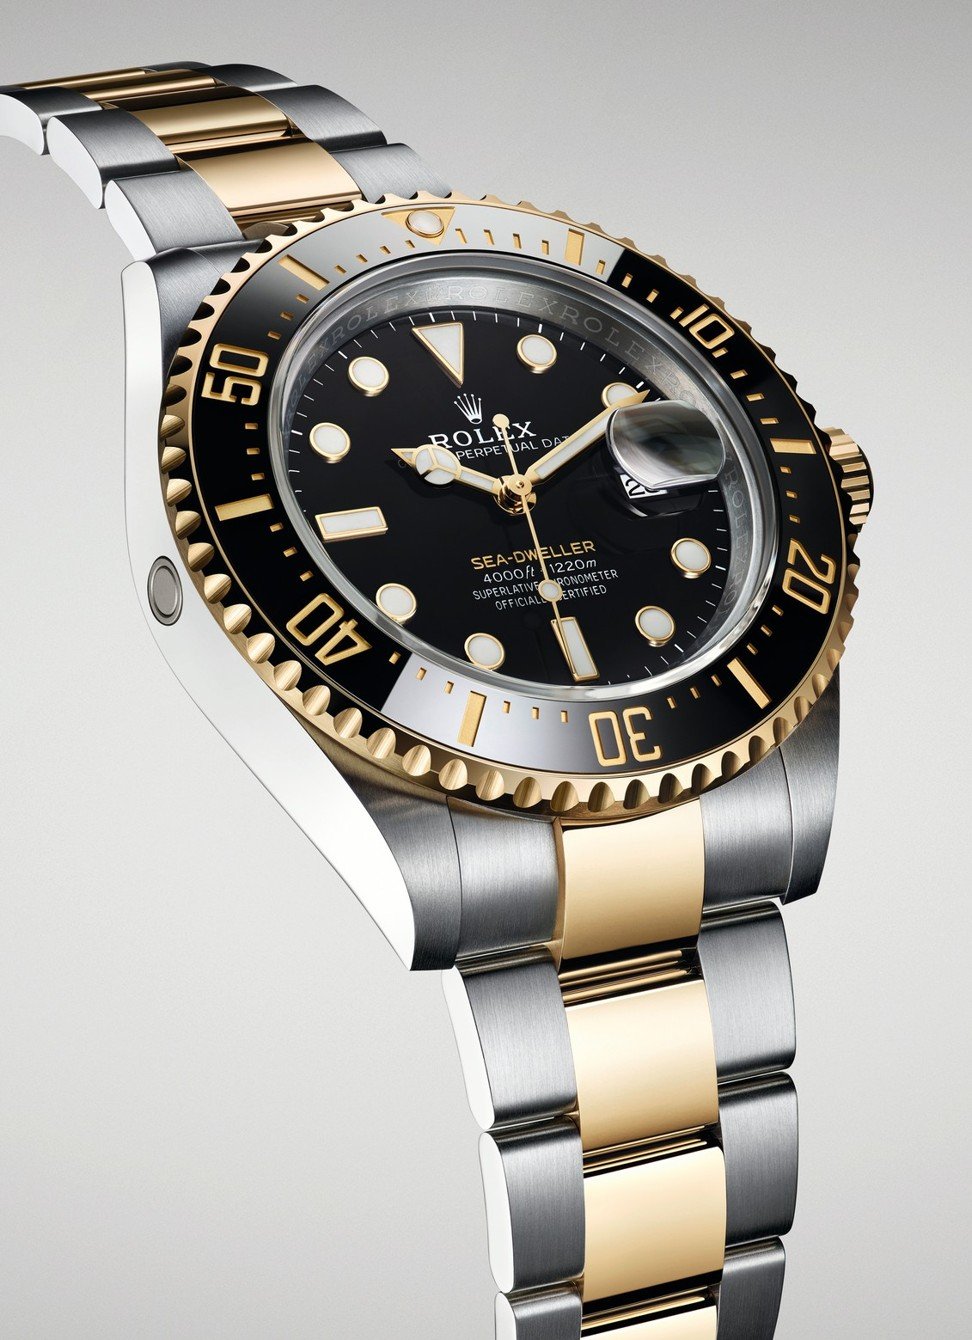 Rolex Oyster Perpetual Sea-Dweller Yellow Rolesor